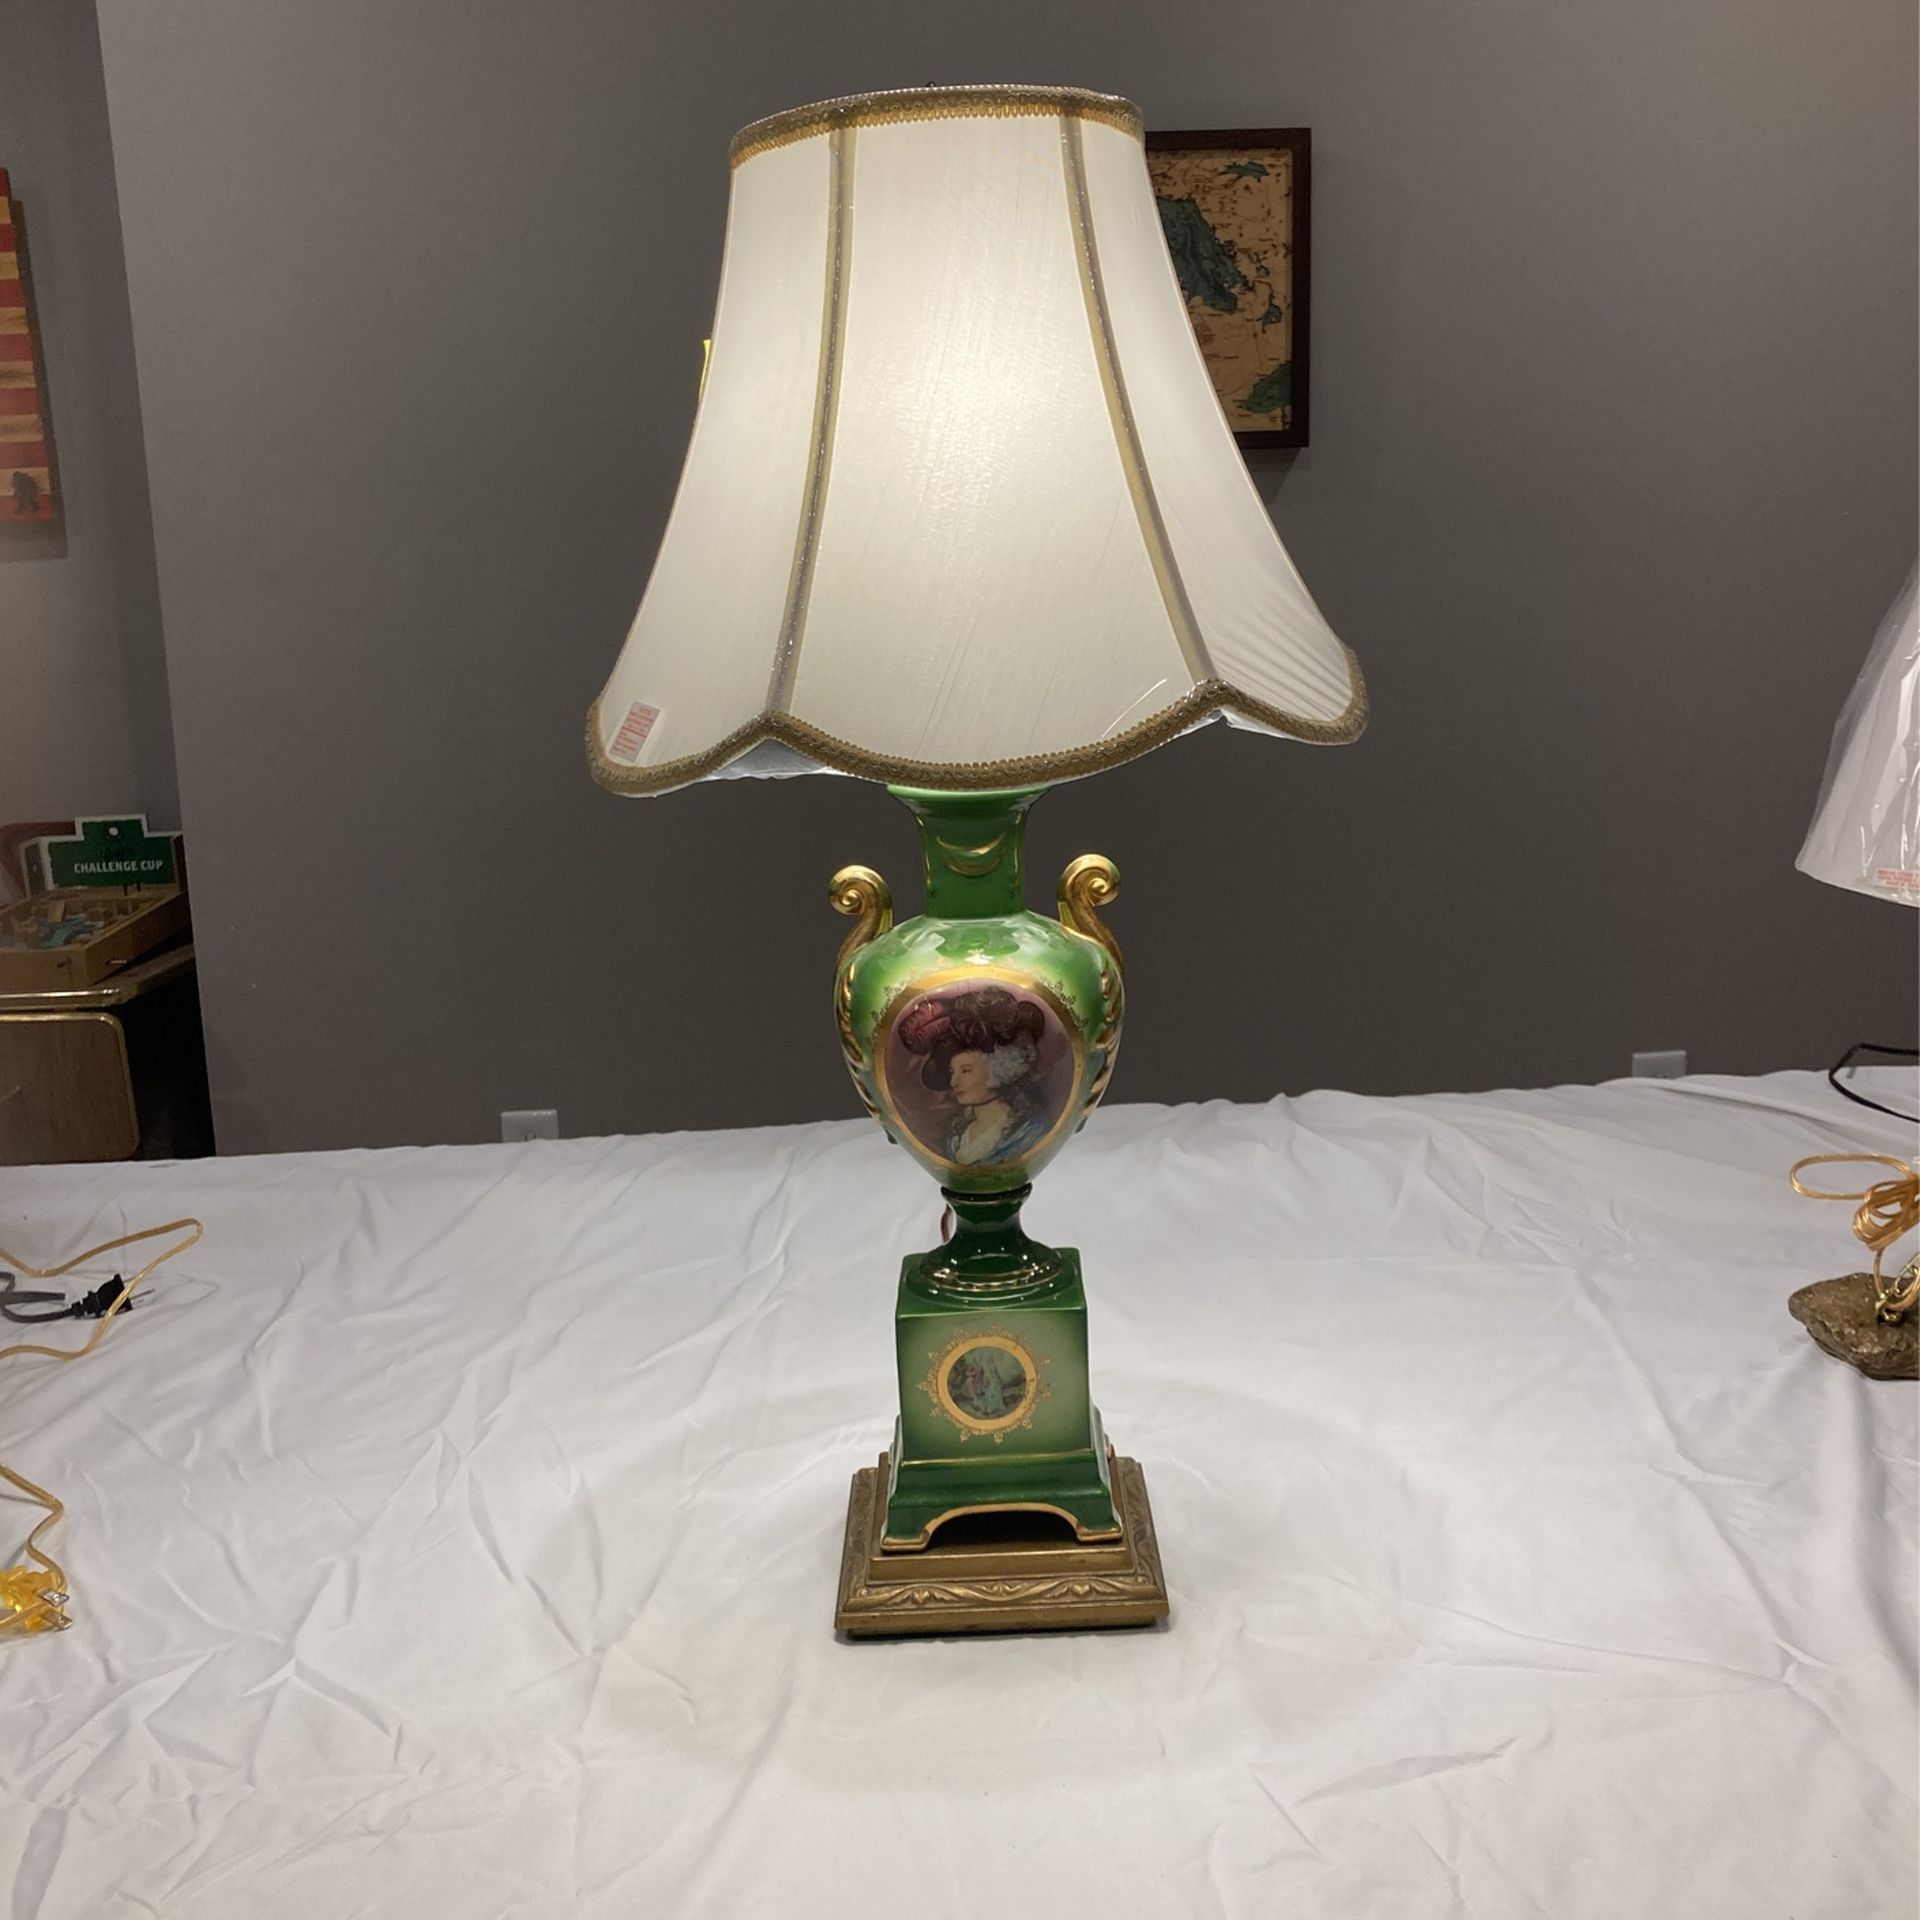 Very Old Beautiful Victorian Lamp. Would Look Great In That Special Room In Your Home.